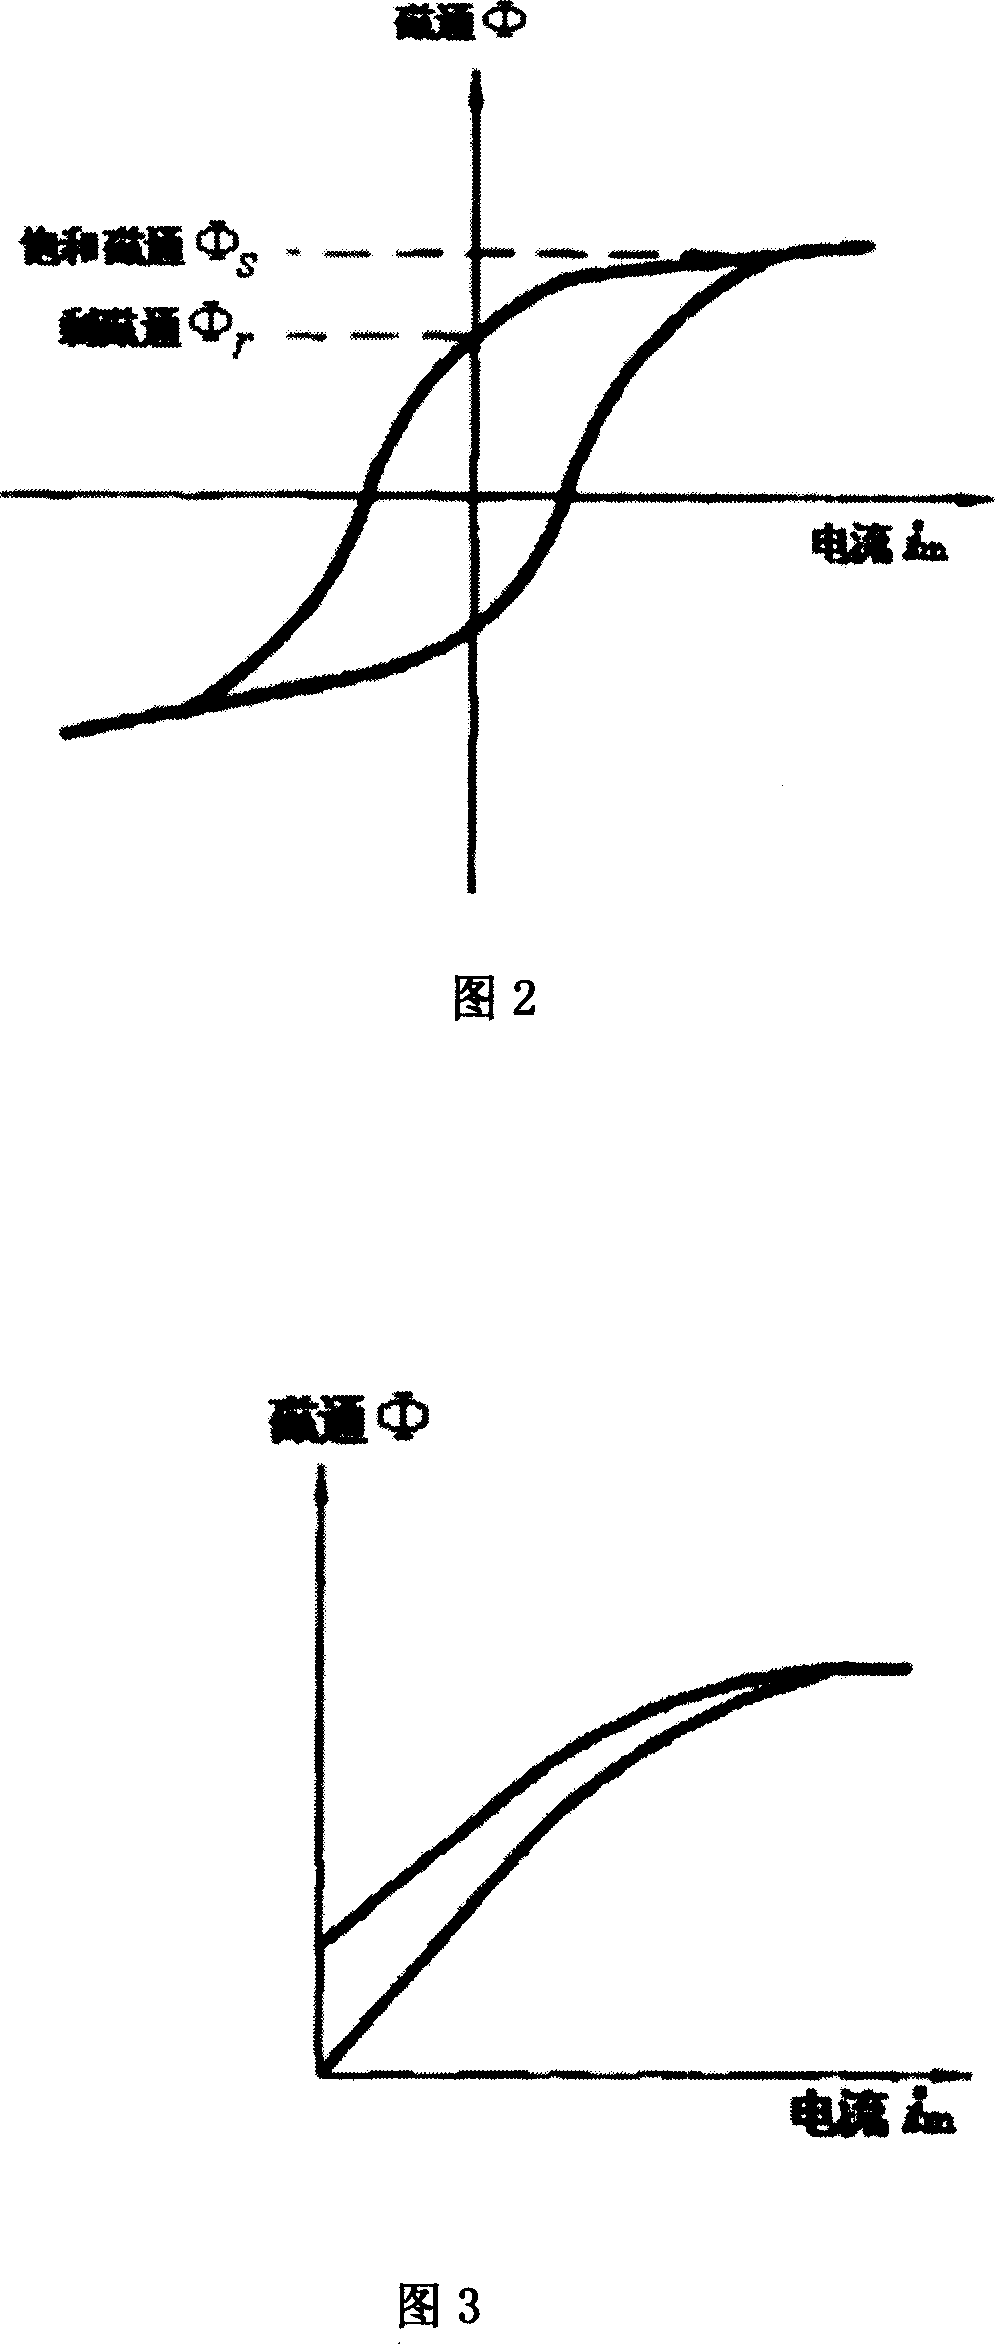 Method for measuring coefficient of residual magnetism based on alternating current method